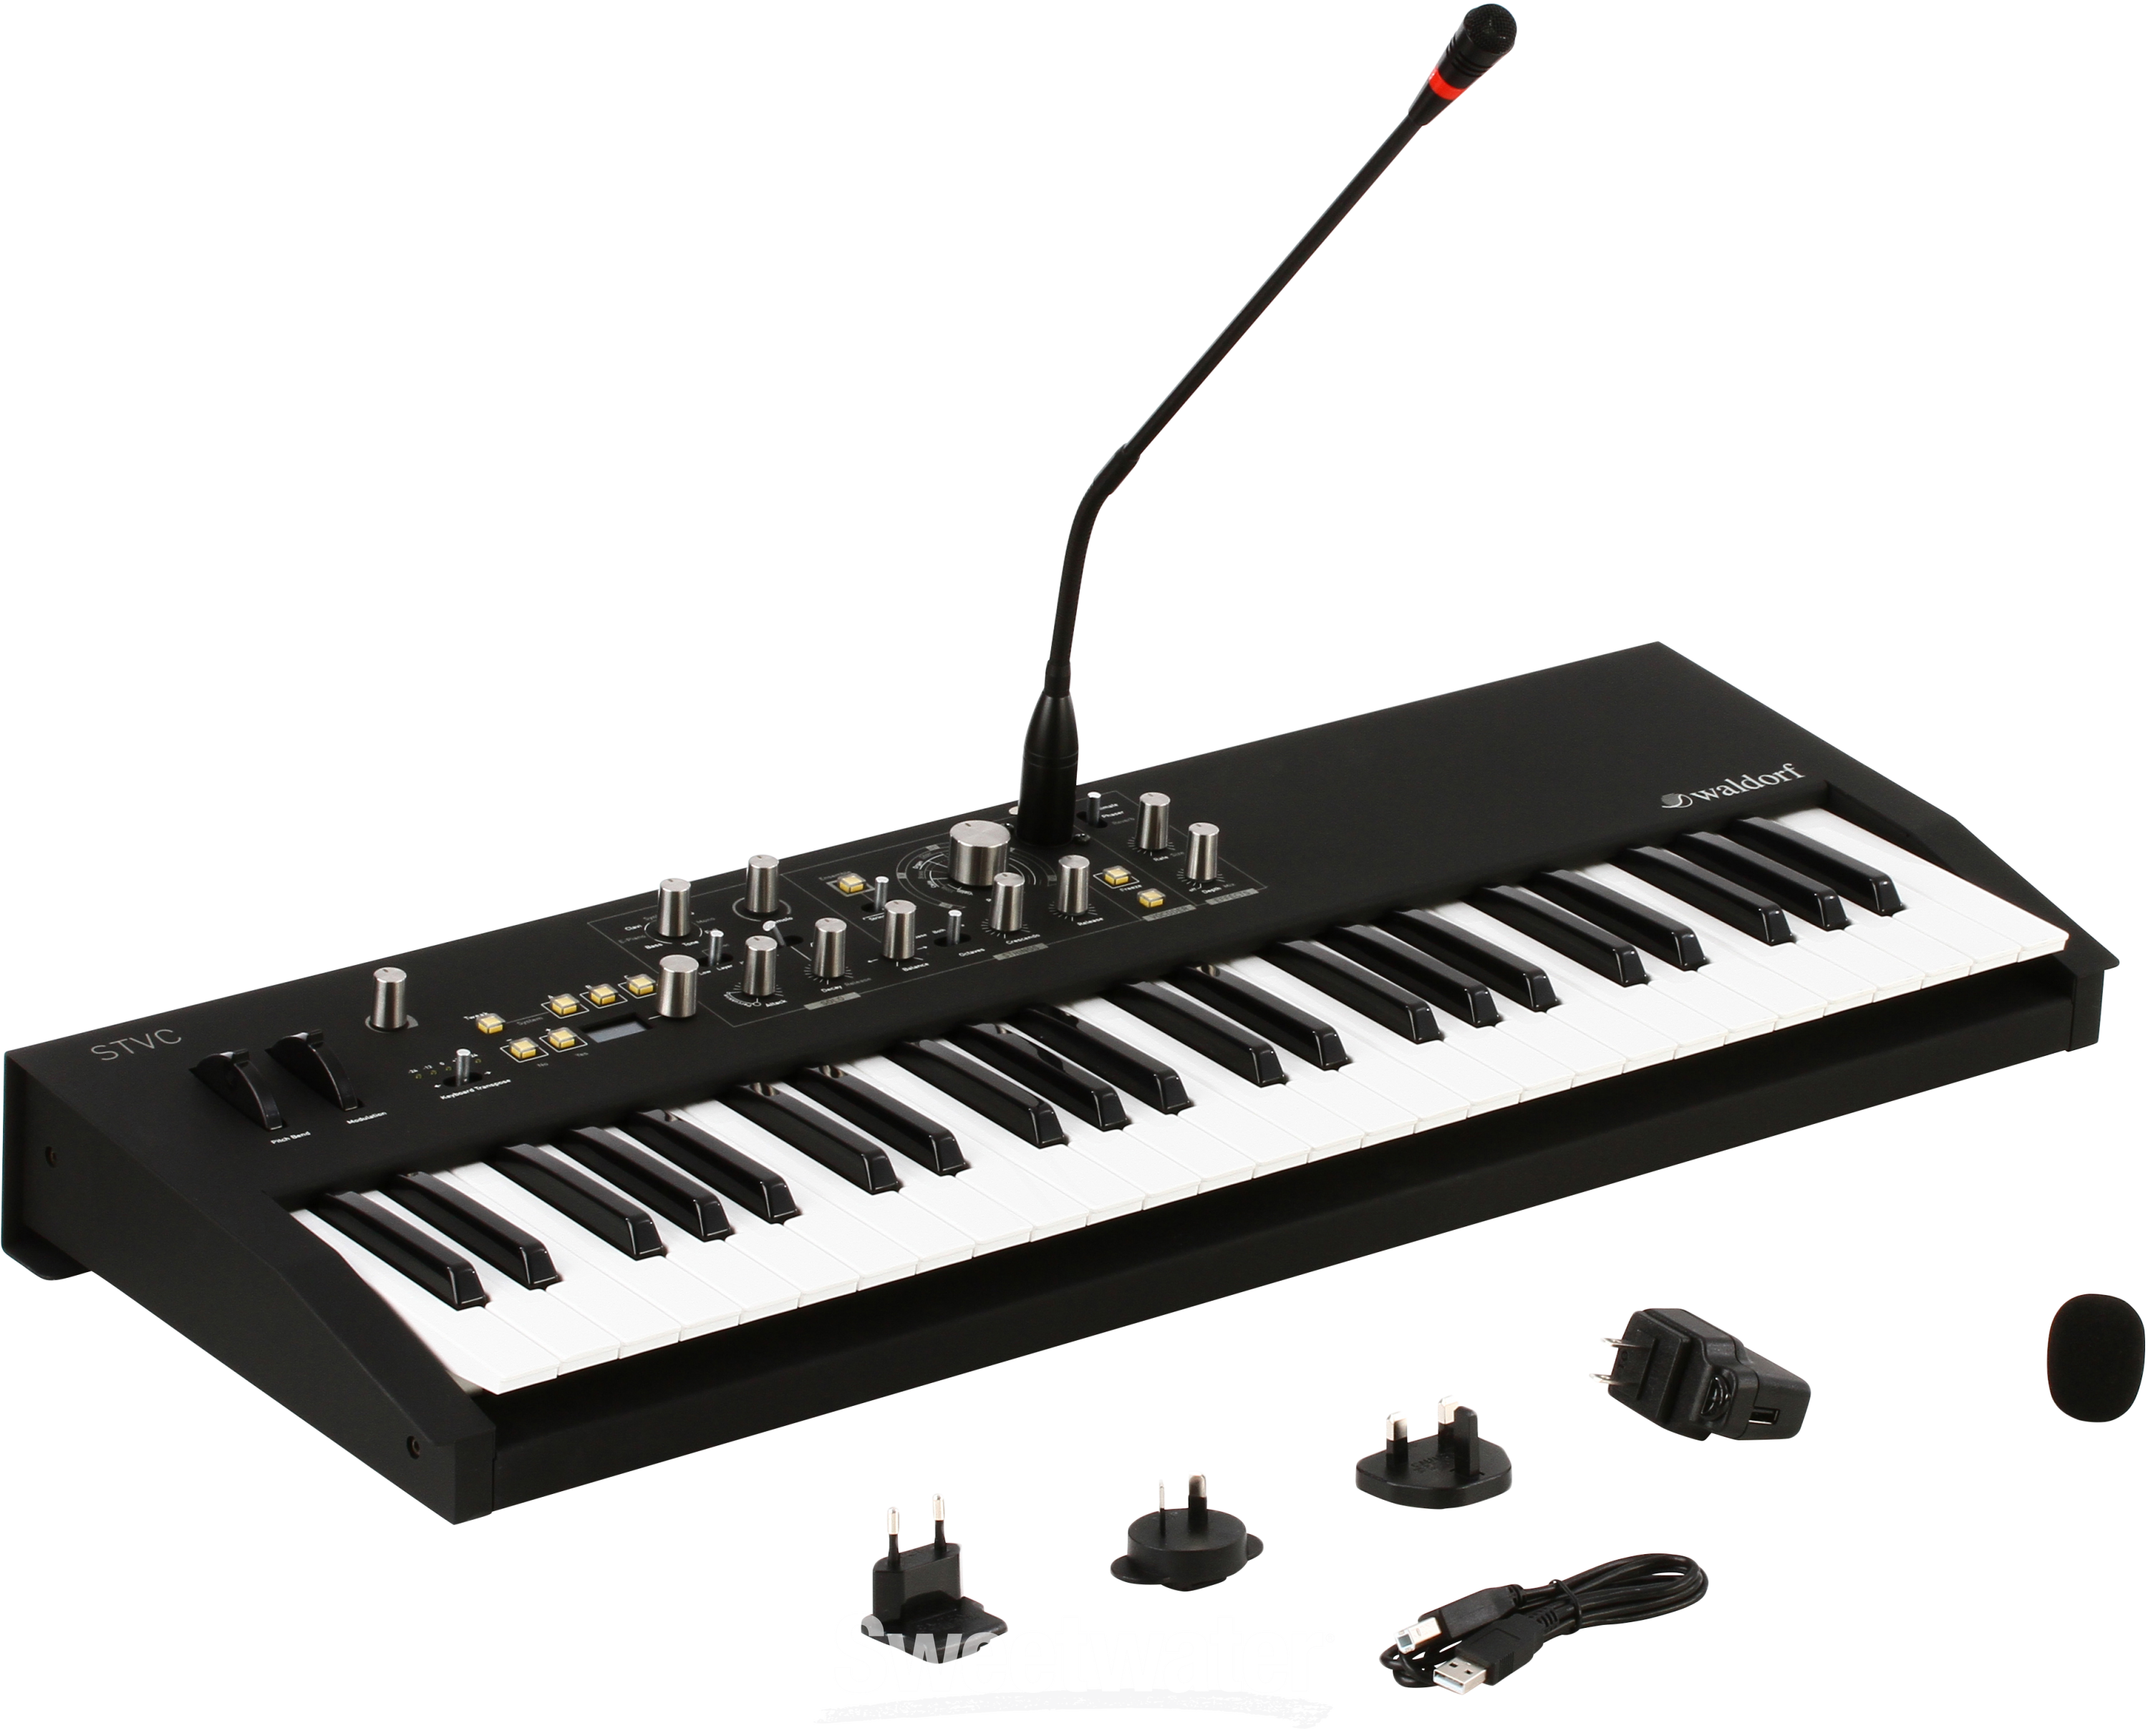 Waldorf STVC String Synthesizer and Vocoder Sweetwater